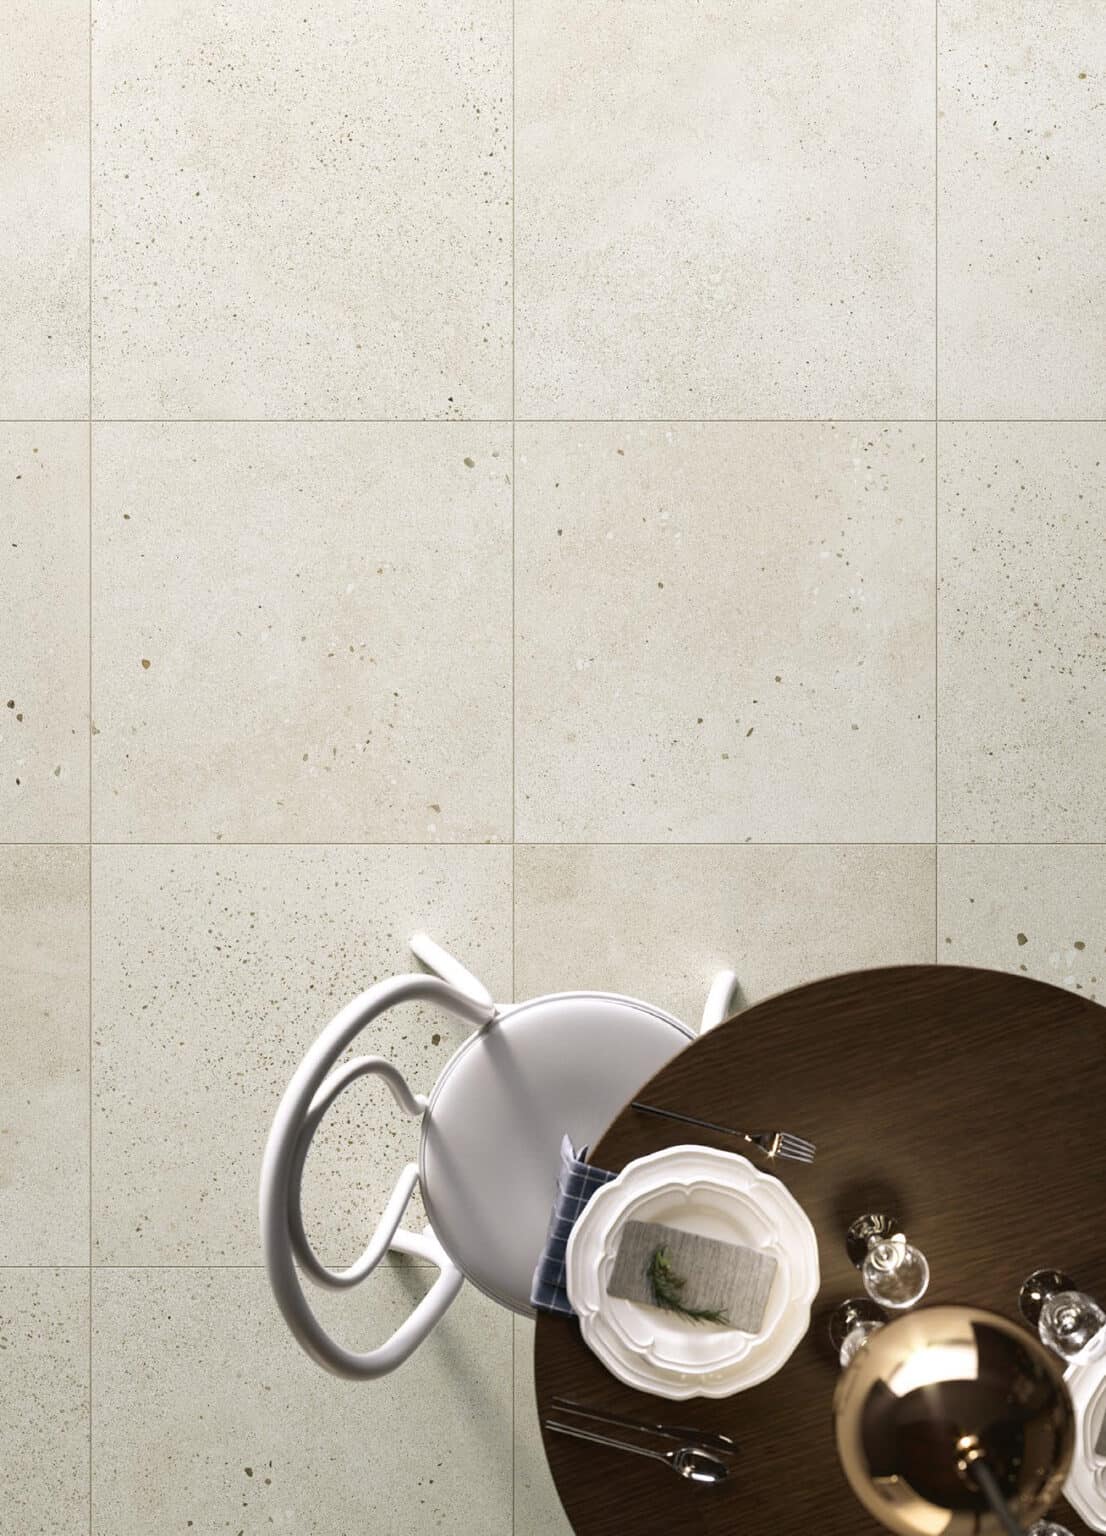 Porcelain Tile Concrete Look - Fioranese - I Cocci - The Shards Page 05 Image 0001